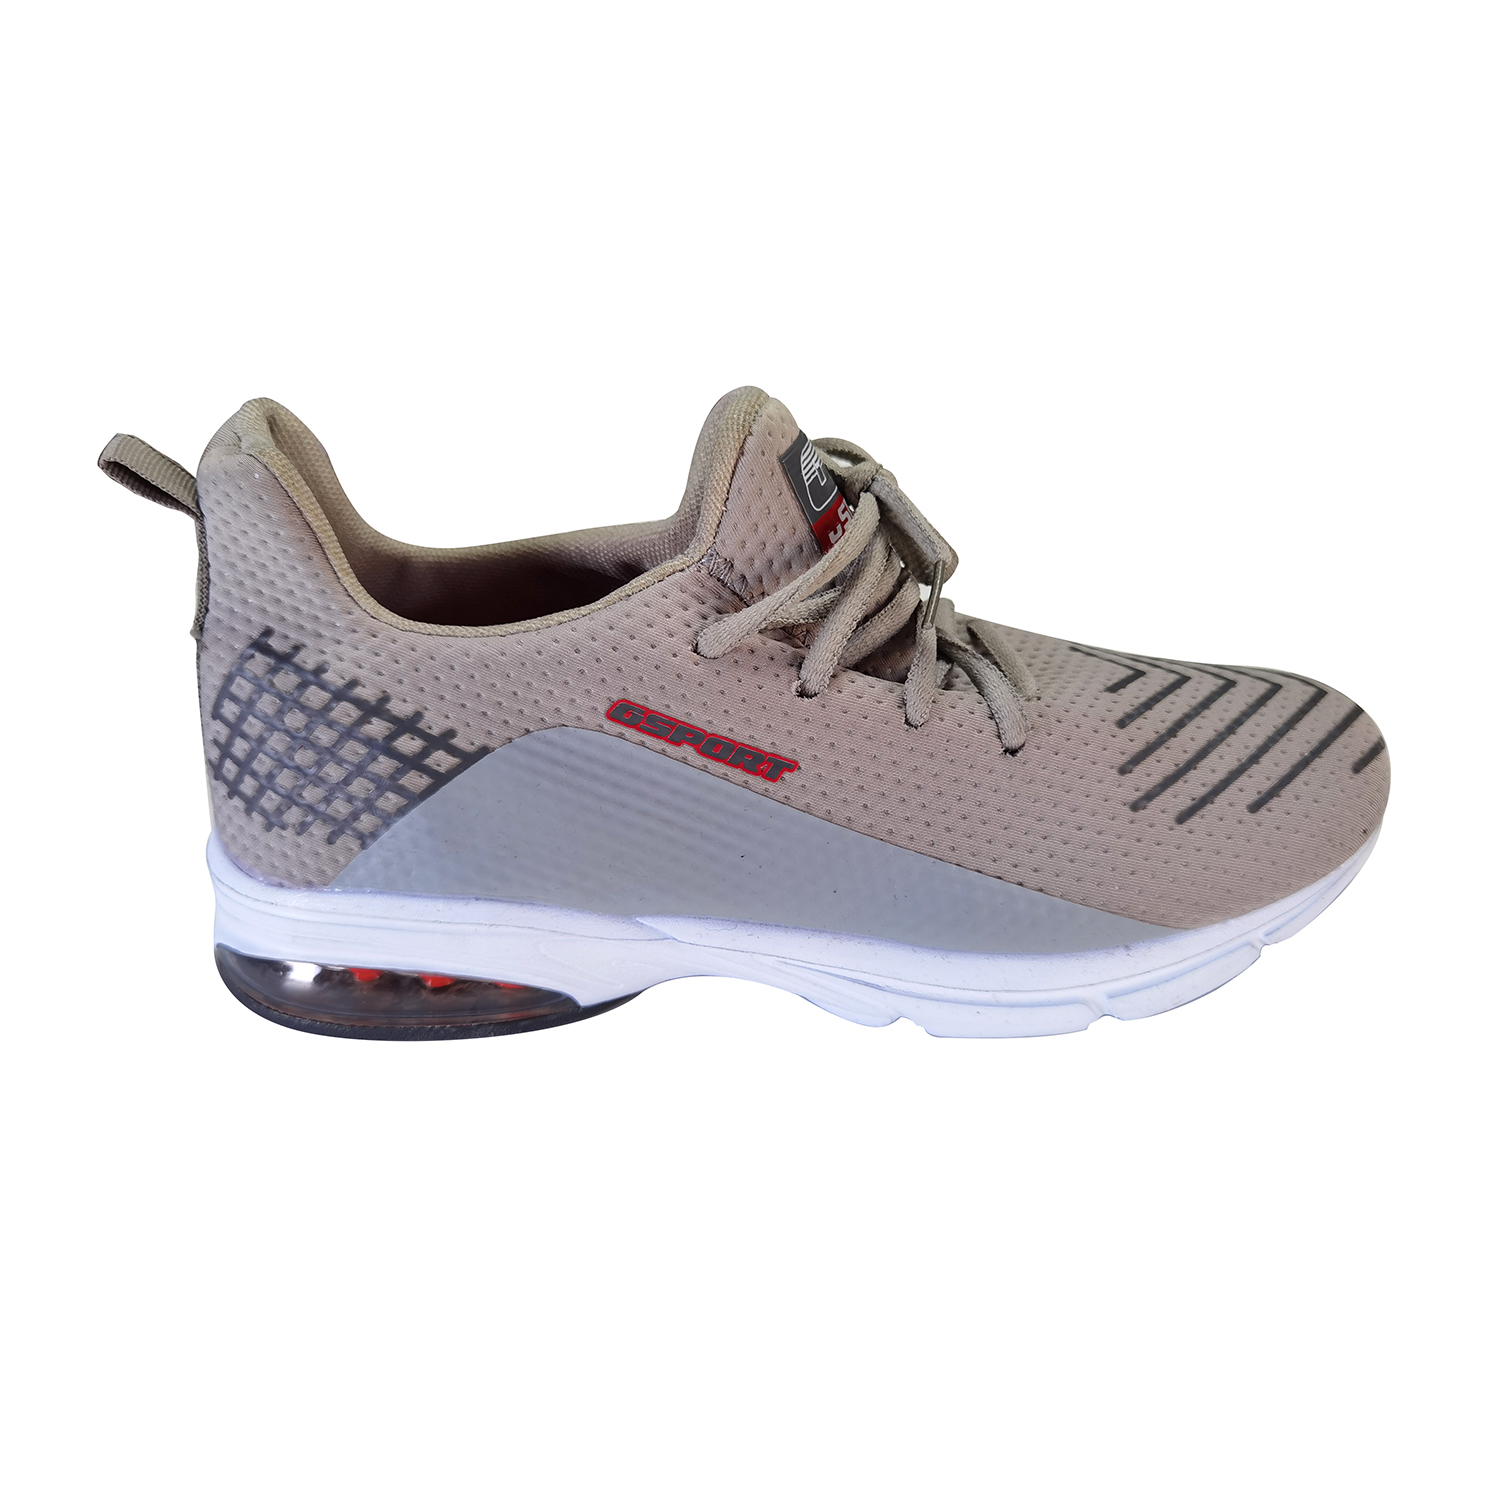 Womens Fashion Sneakers Lightweight Knitted Running Athletic Shoes Featured Image